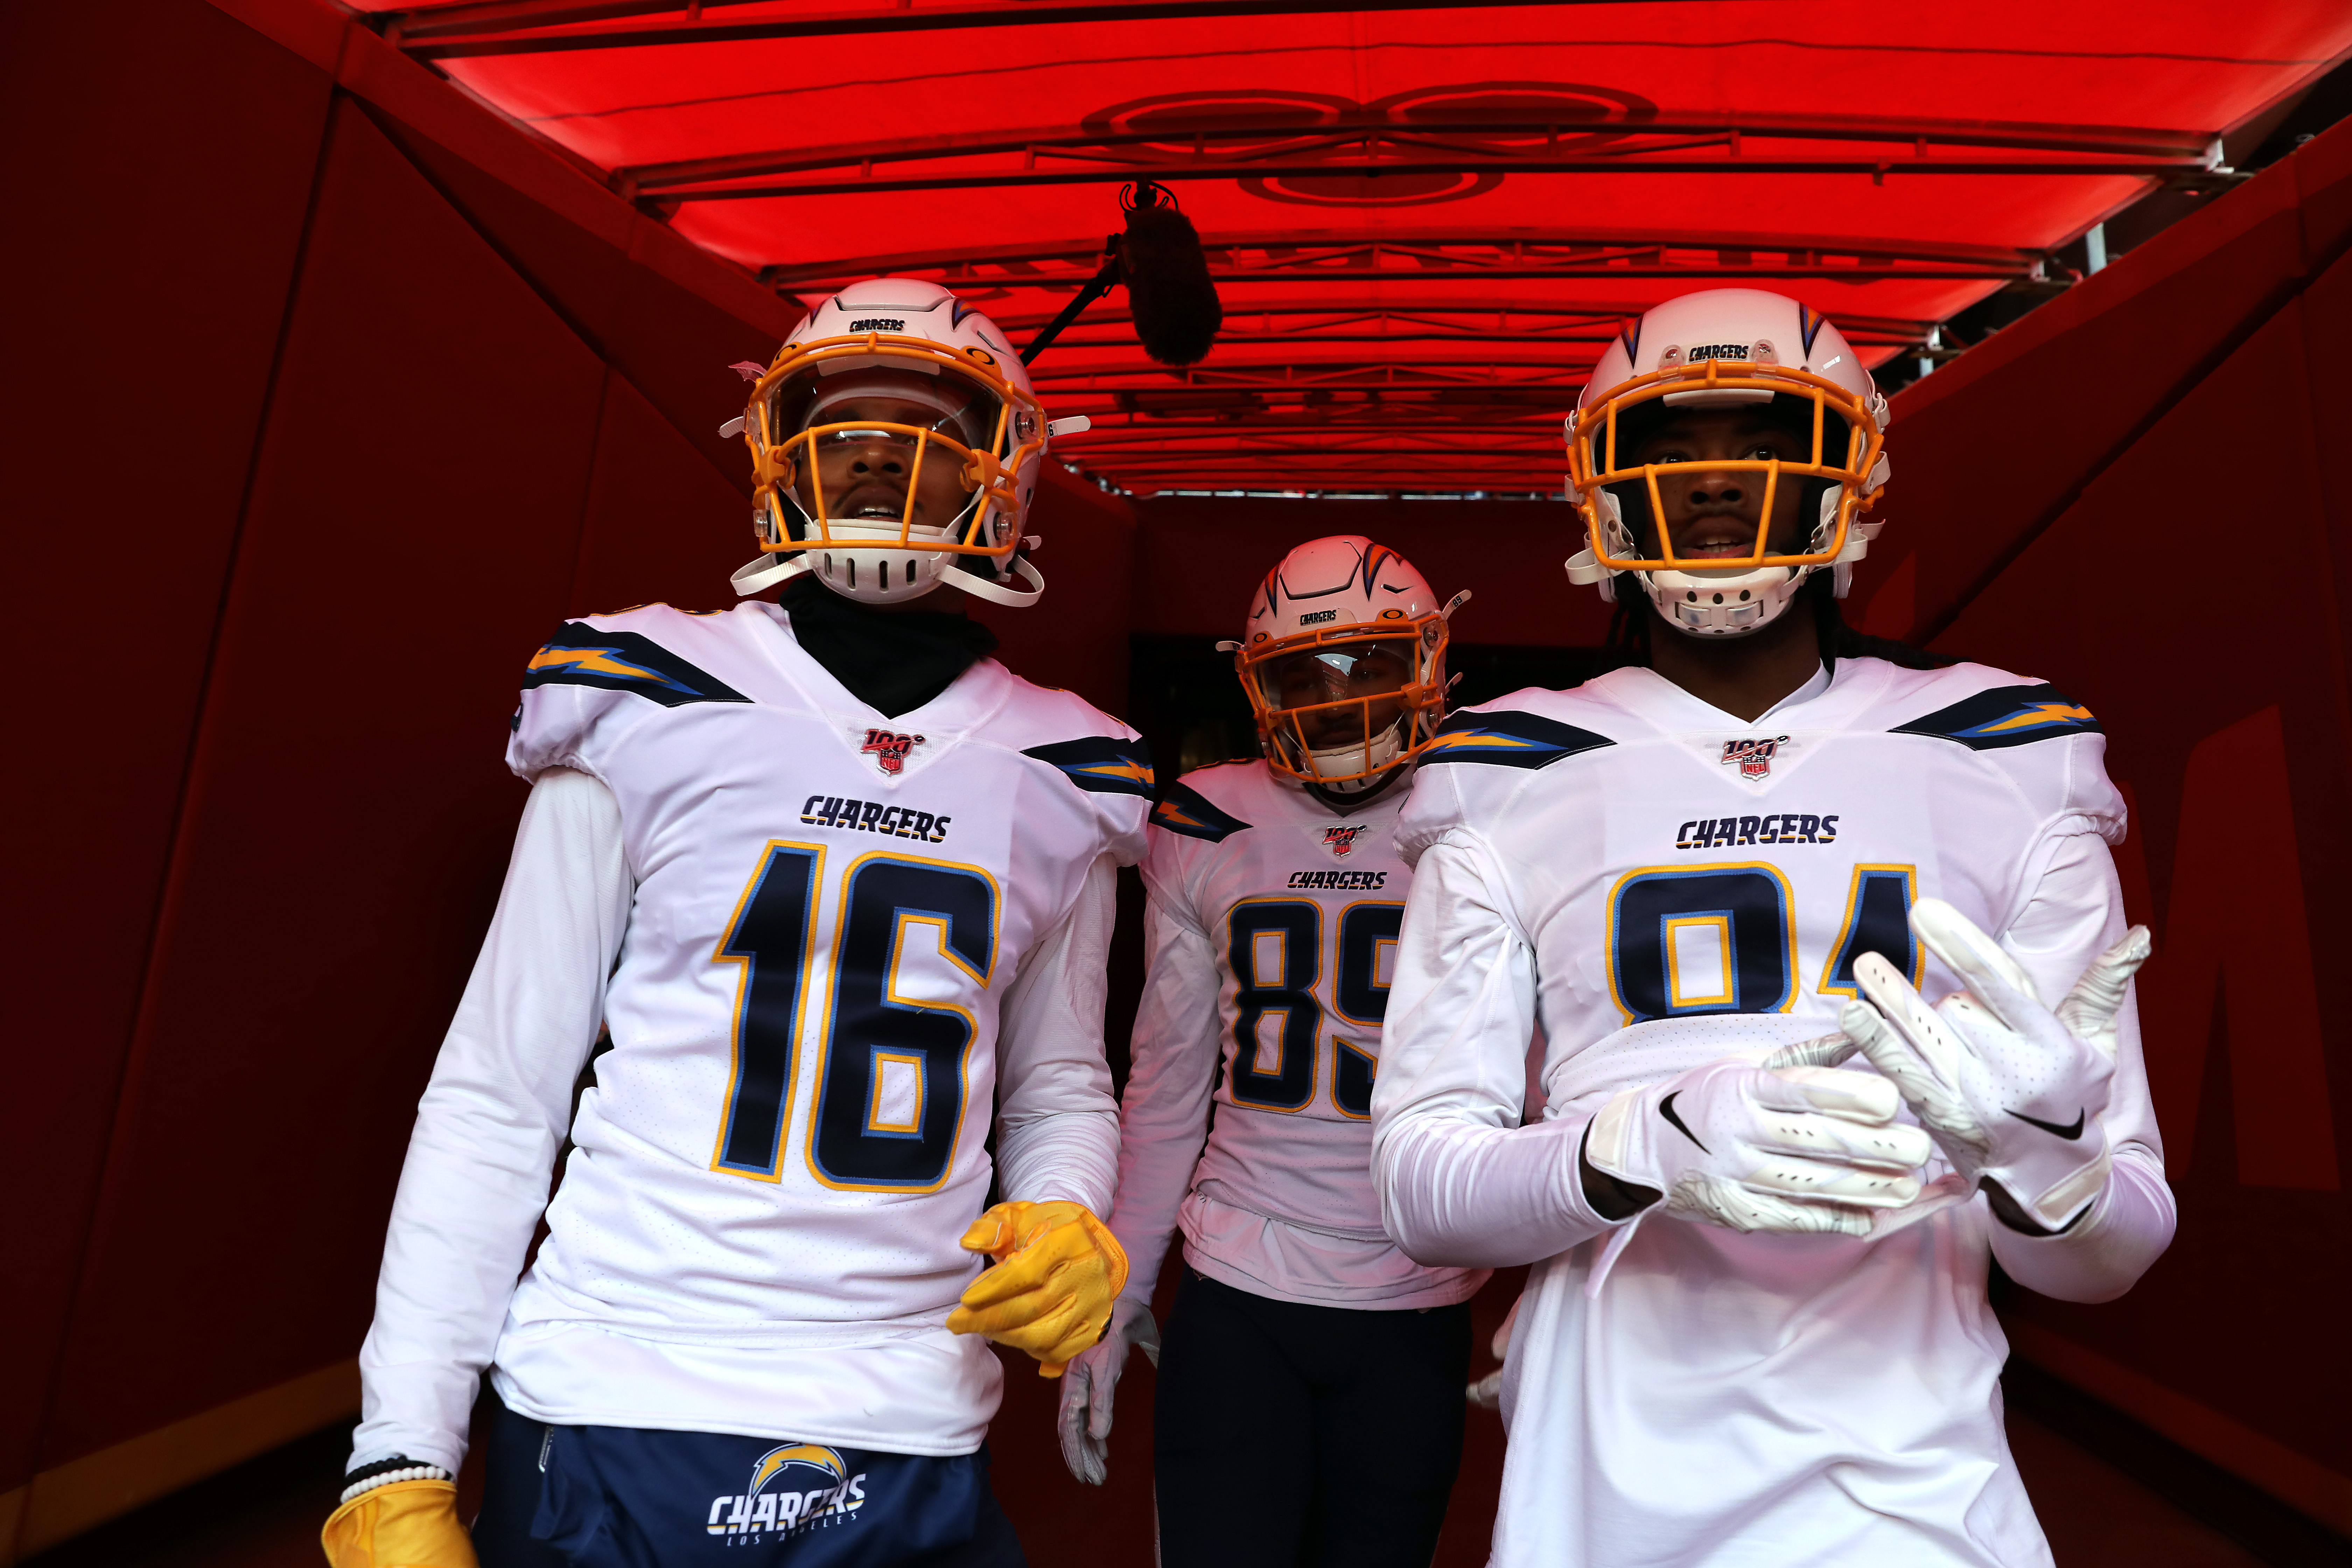 chargers alternate uniforms